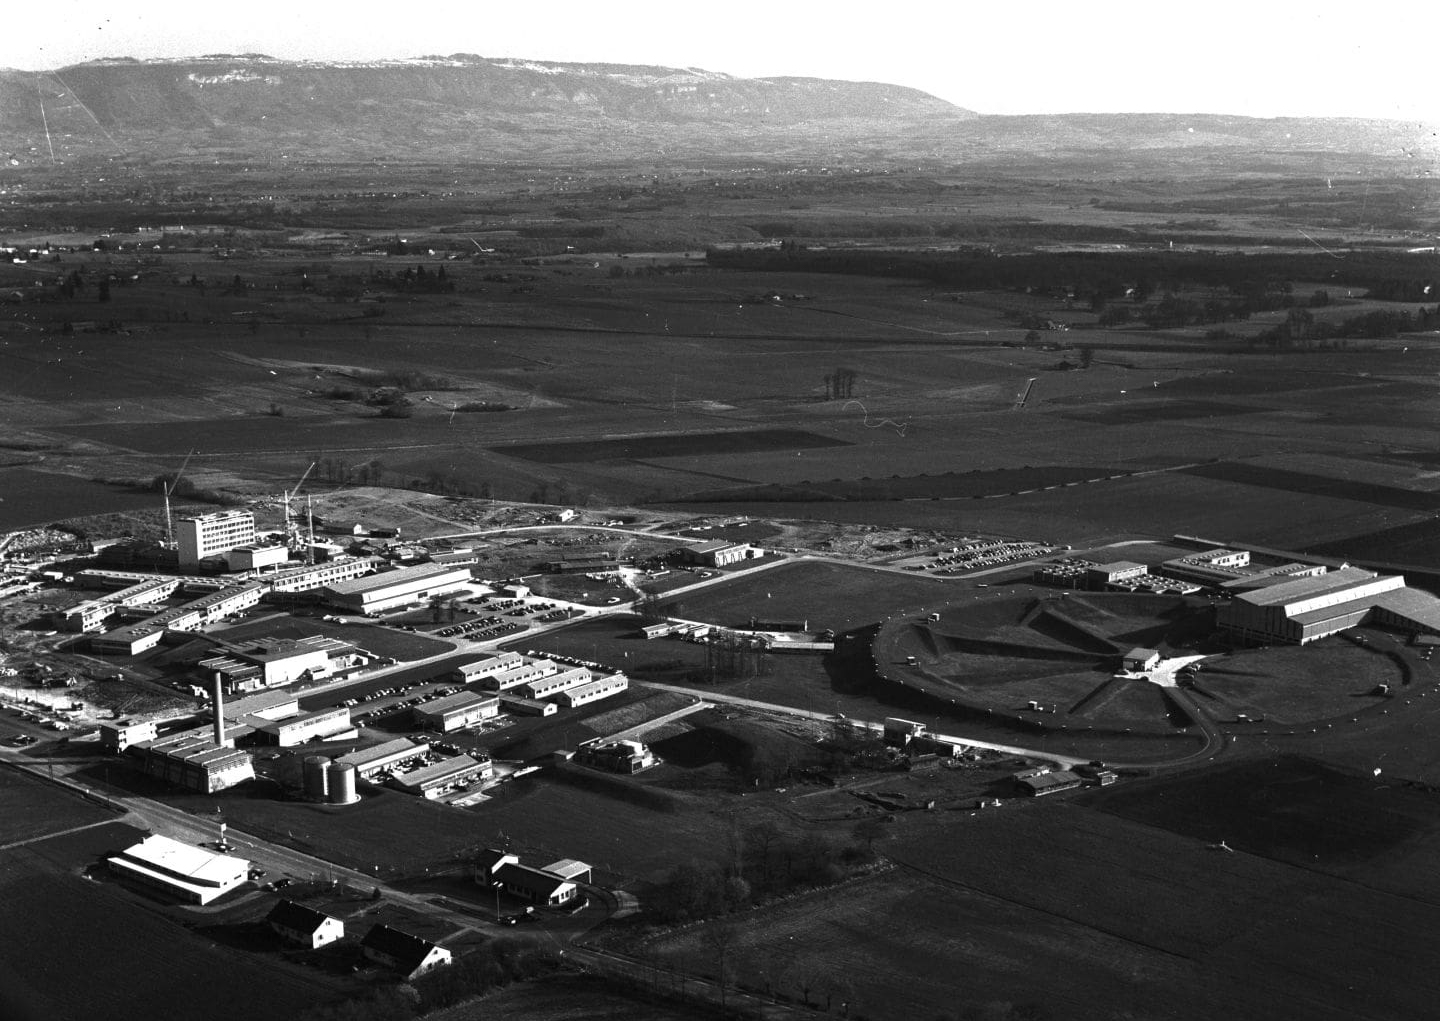 Aerial view of CERN